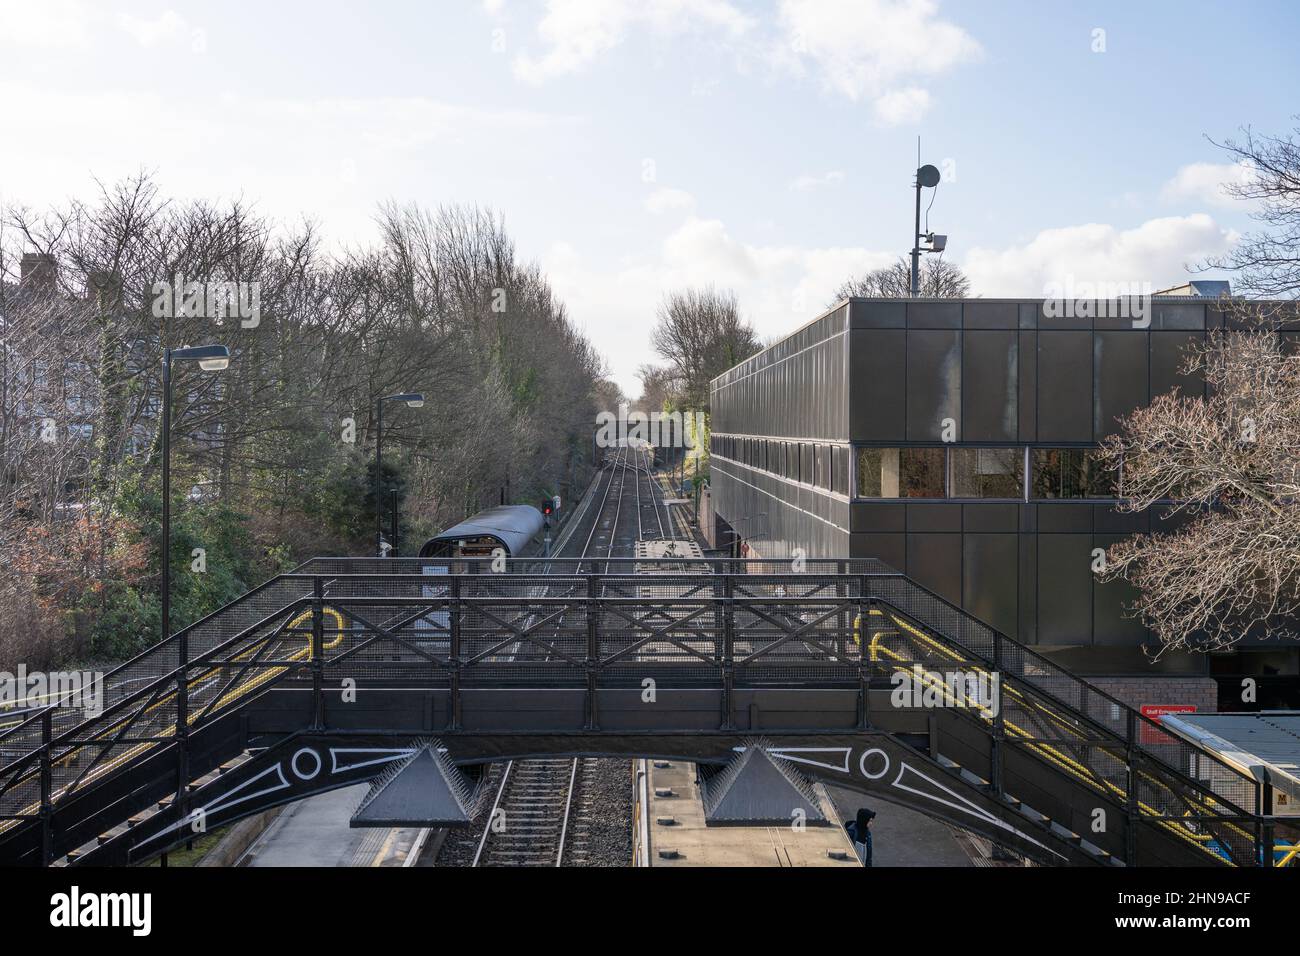 South Gosforth station, on the Tyne and Wear Metro electric light rail system, Newcastle upon Tyne, UK. Stock Photo